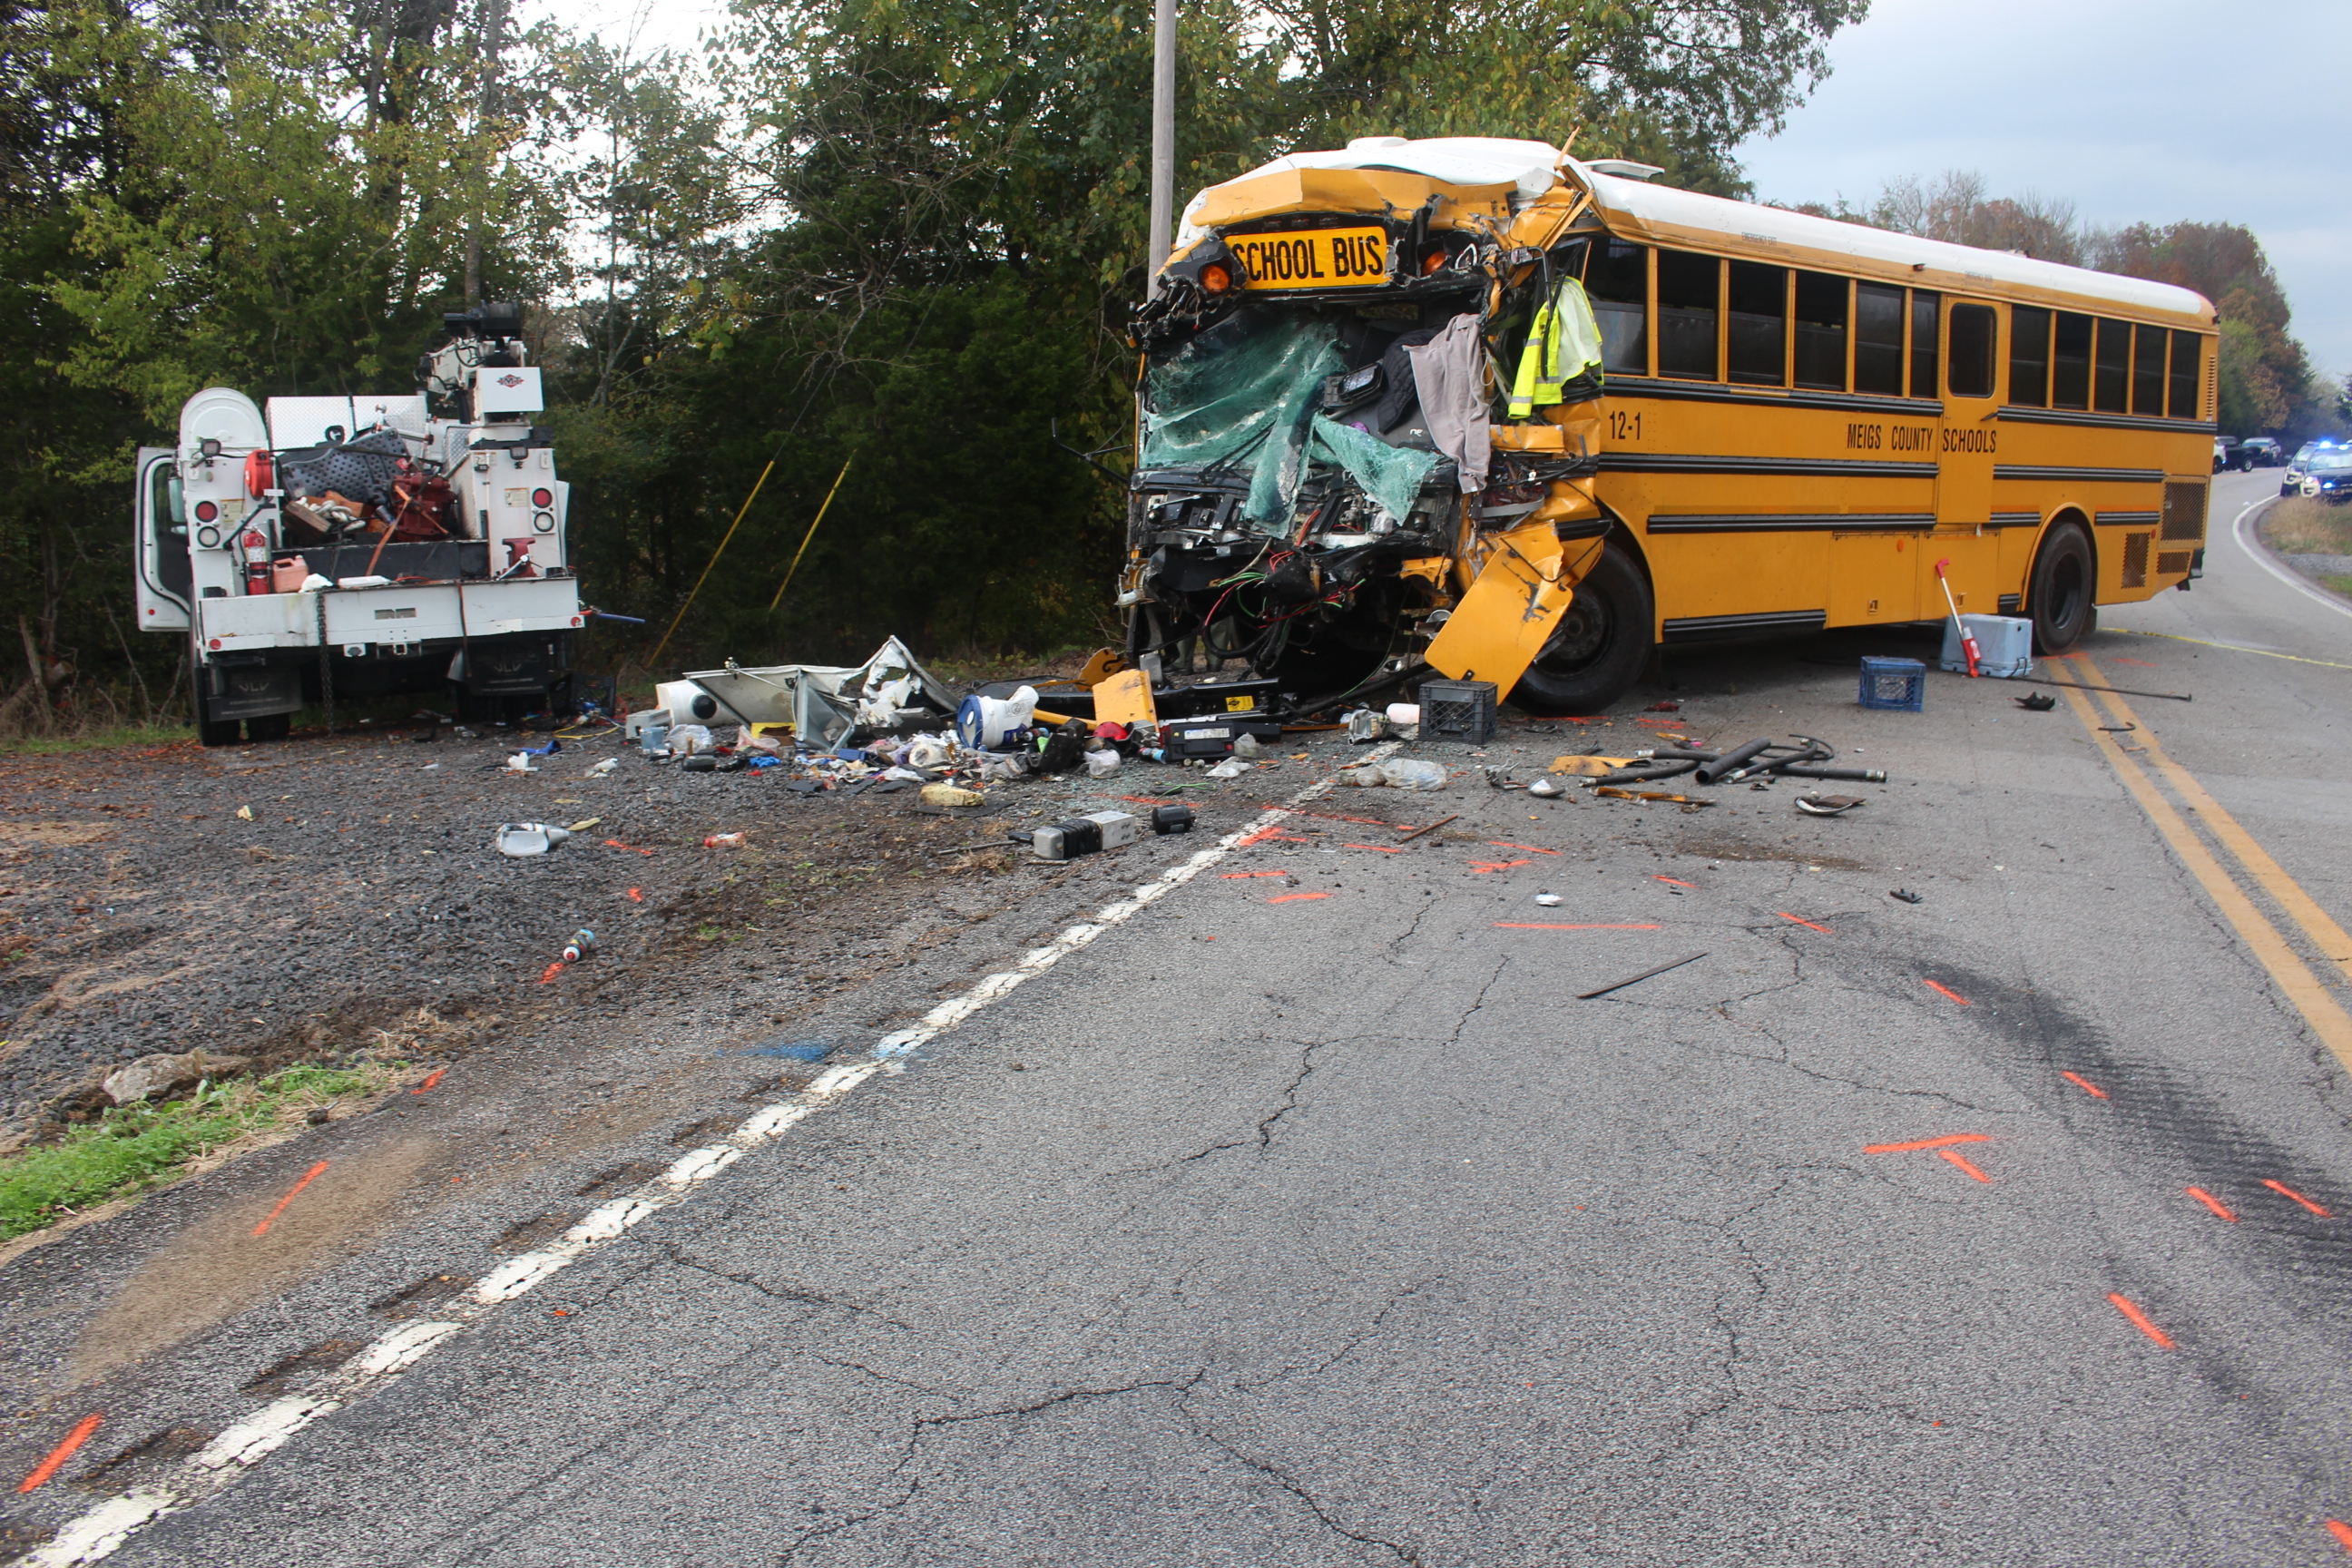 Photo of two vehicles postcrash. The yellow school bus is seen from the front left side and has a severely crushed front. The bu